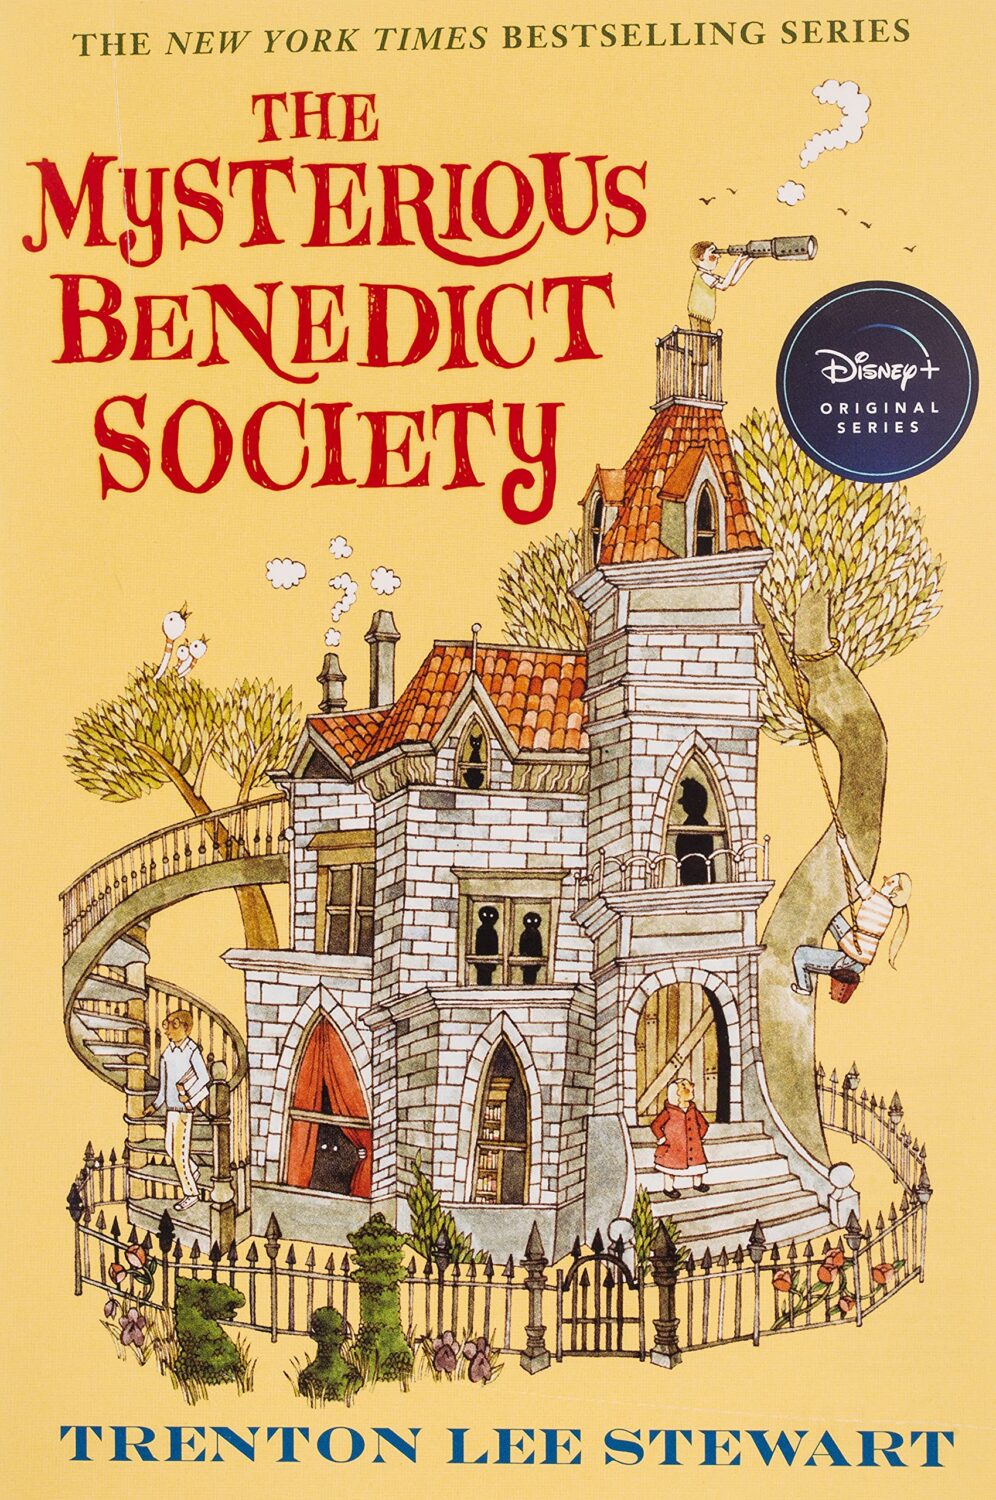 The Mysterious Benedict Society and more mystery books